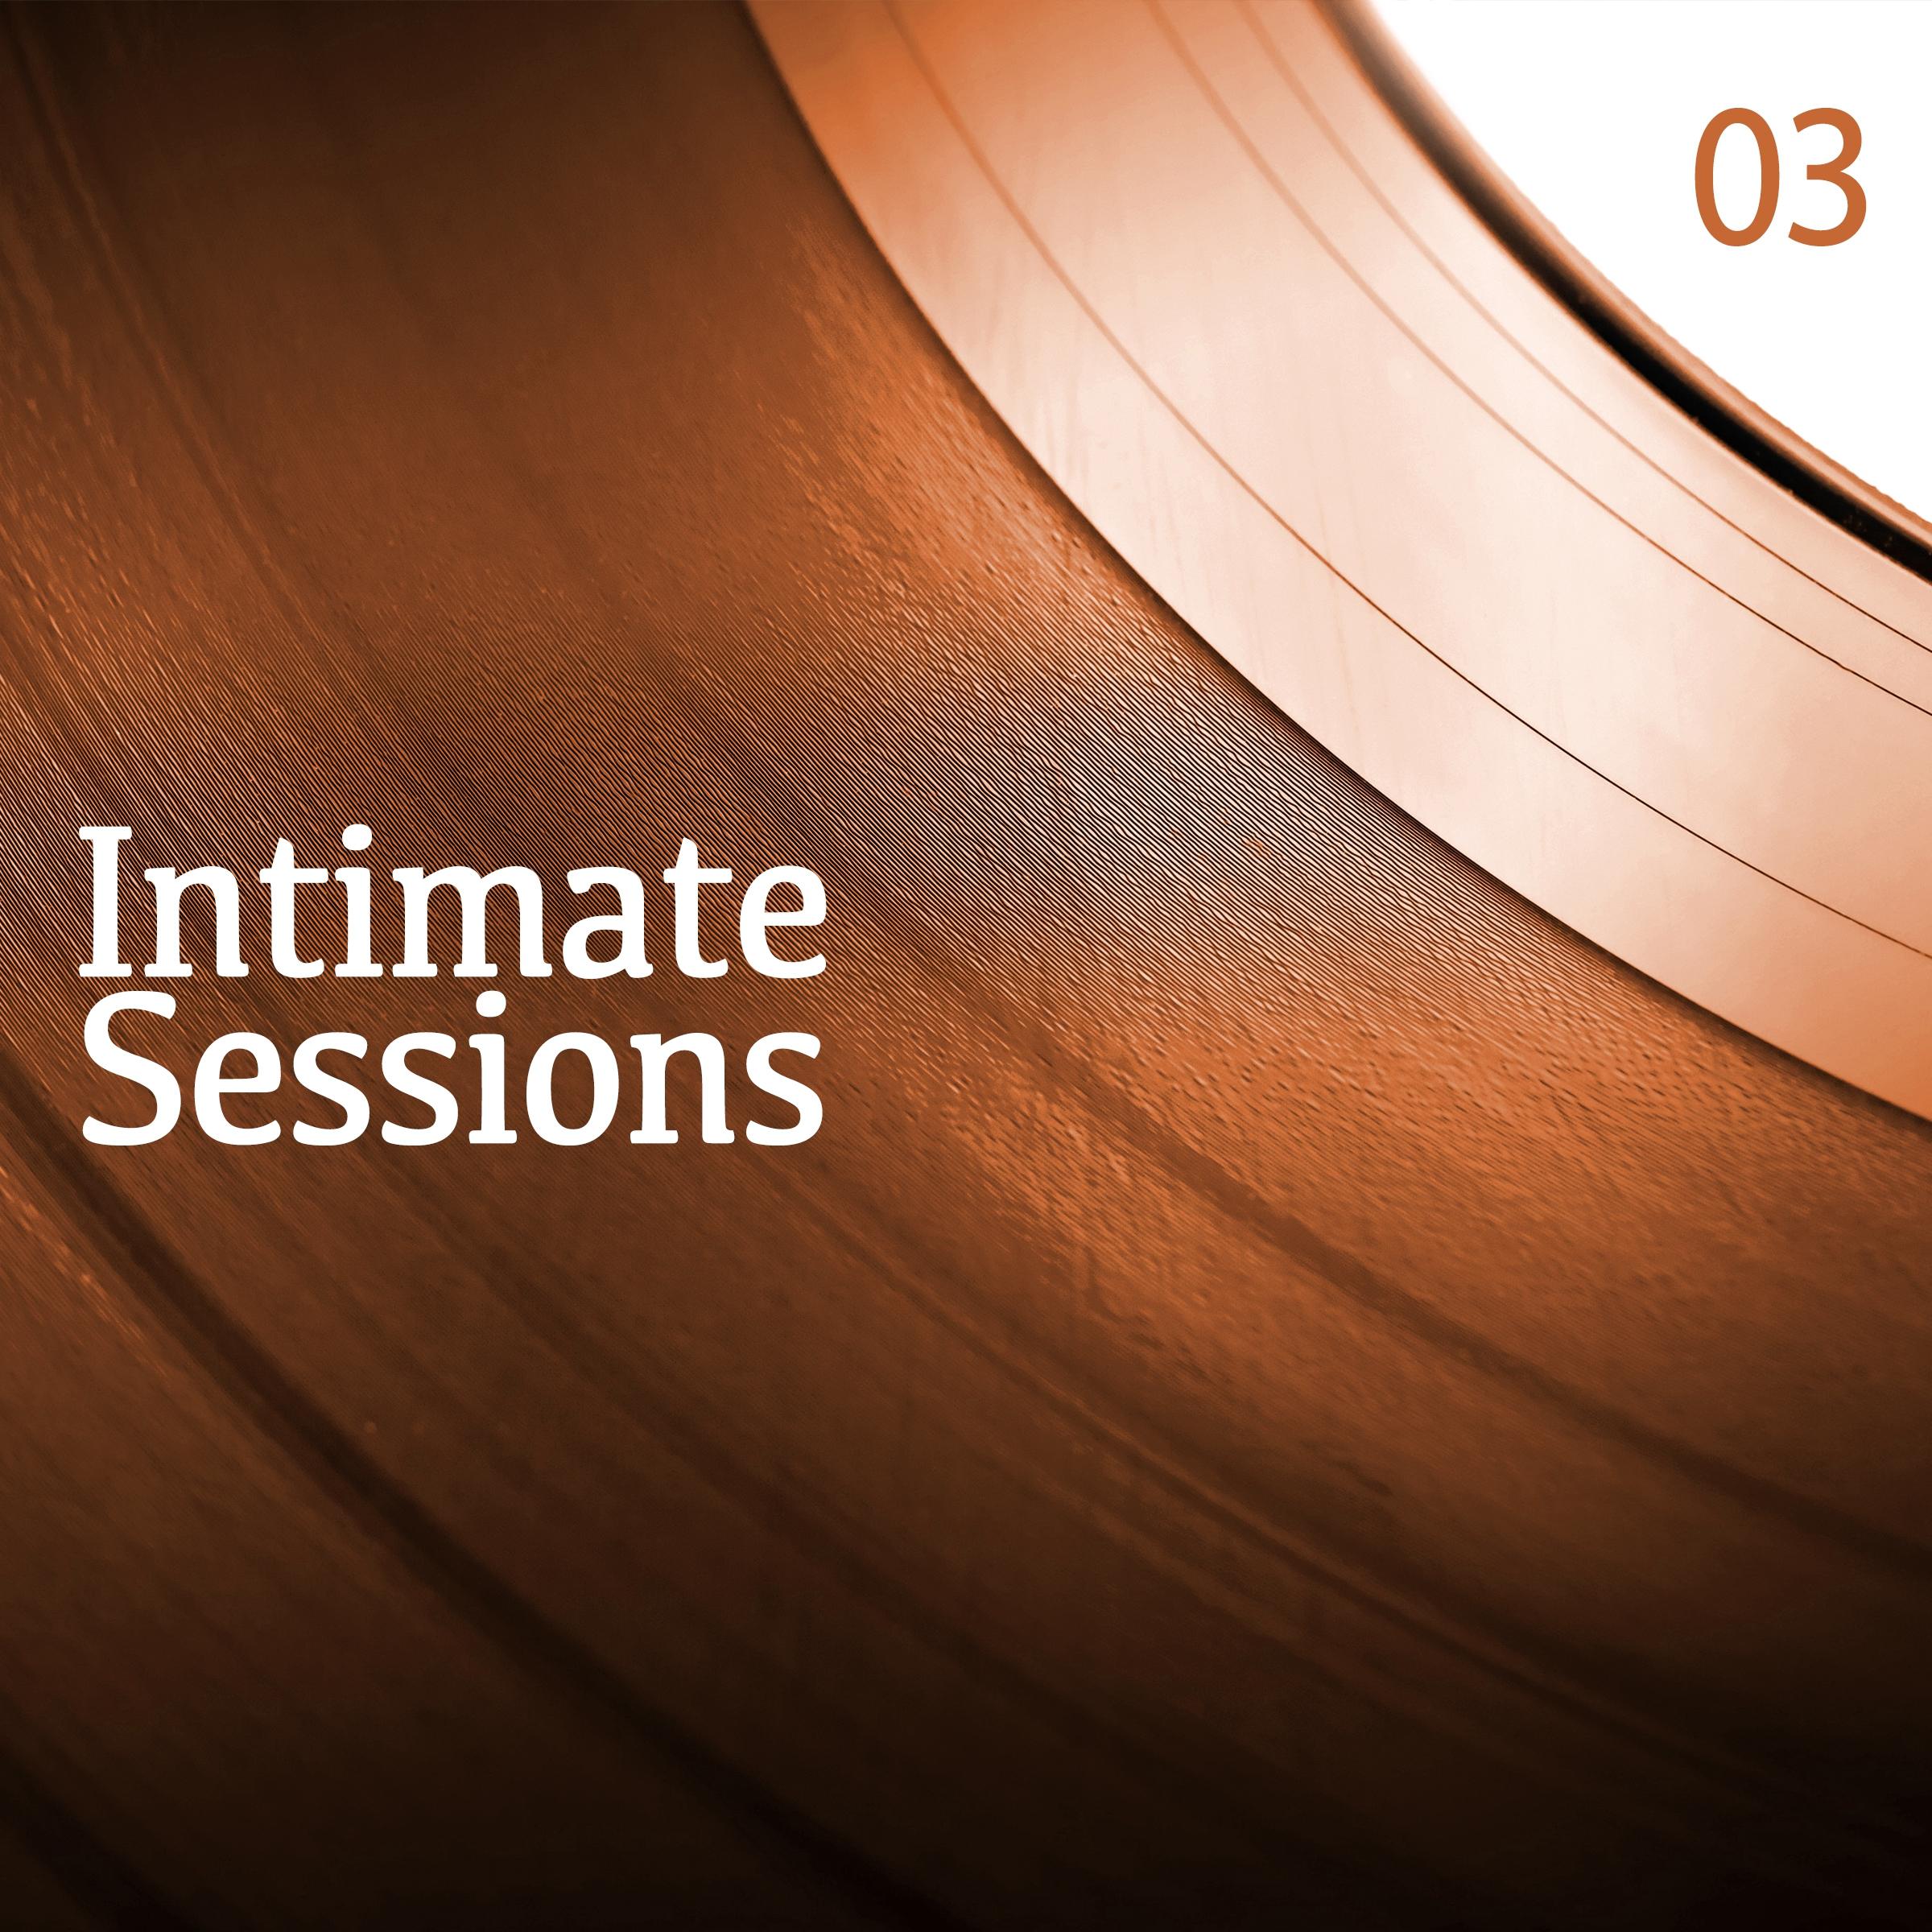 Intimate Sessions, Vol. 03